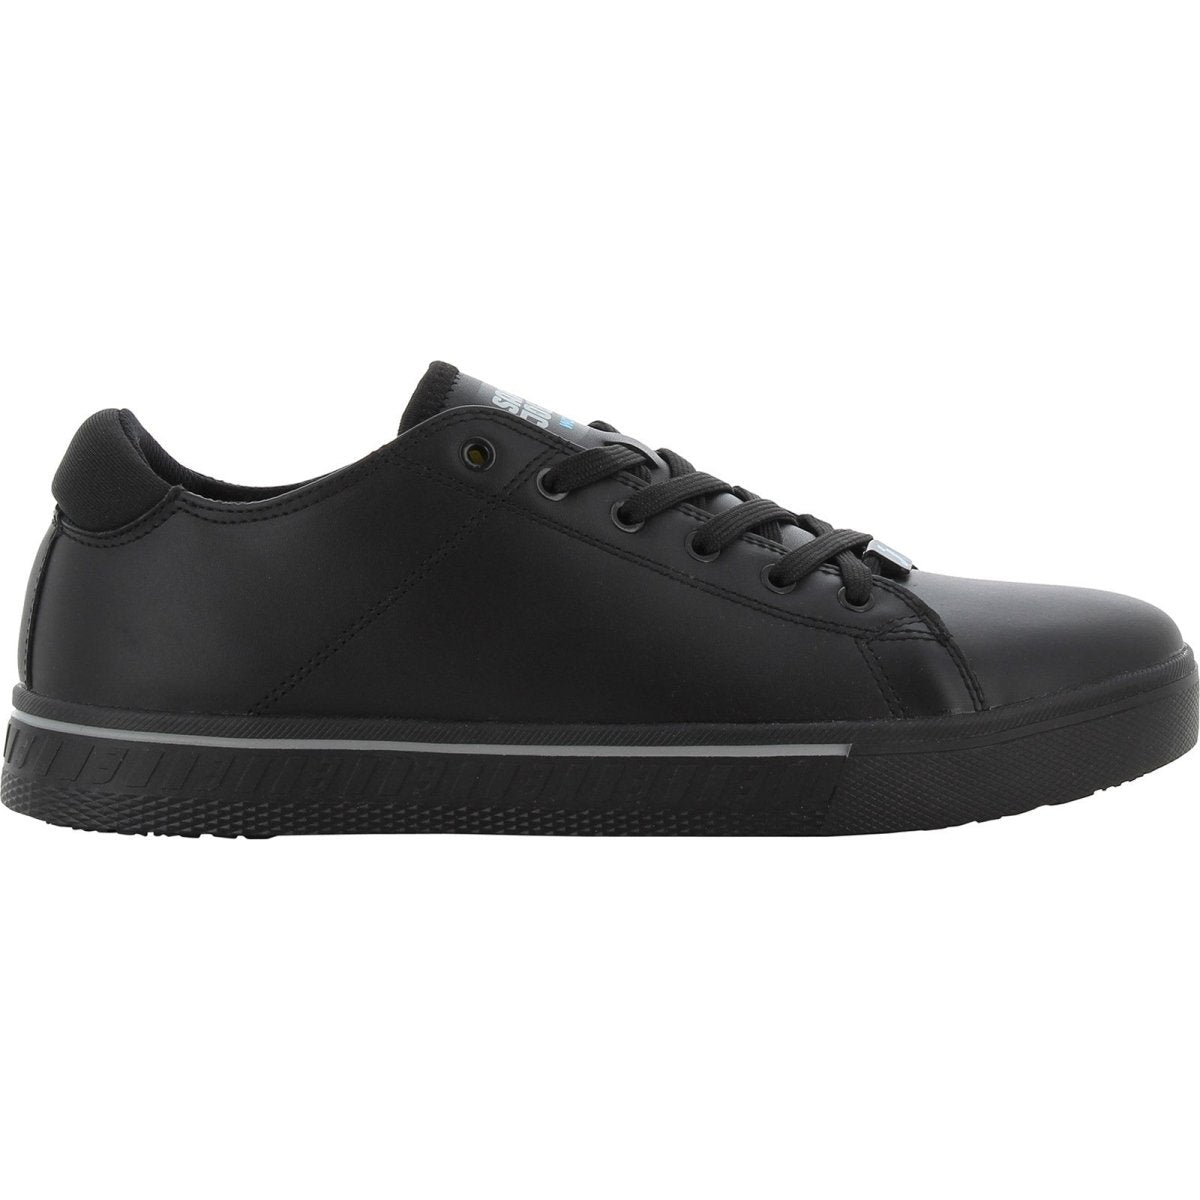 Safety Jogger COOL O2 Trainer - Shoe Store Direct